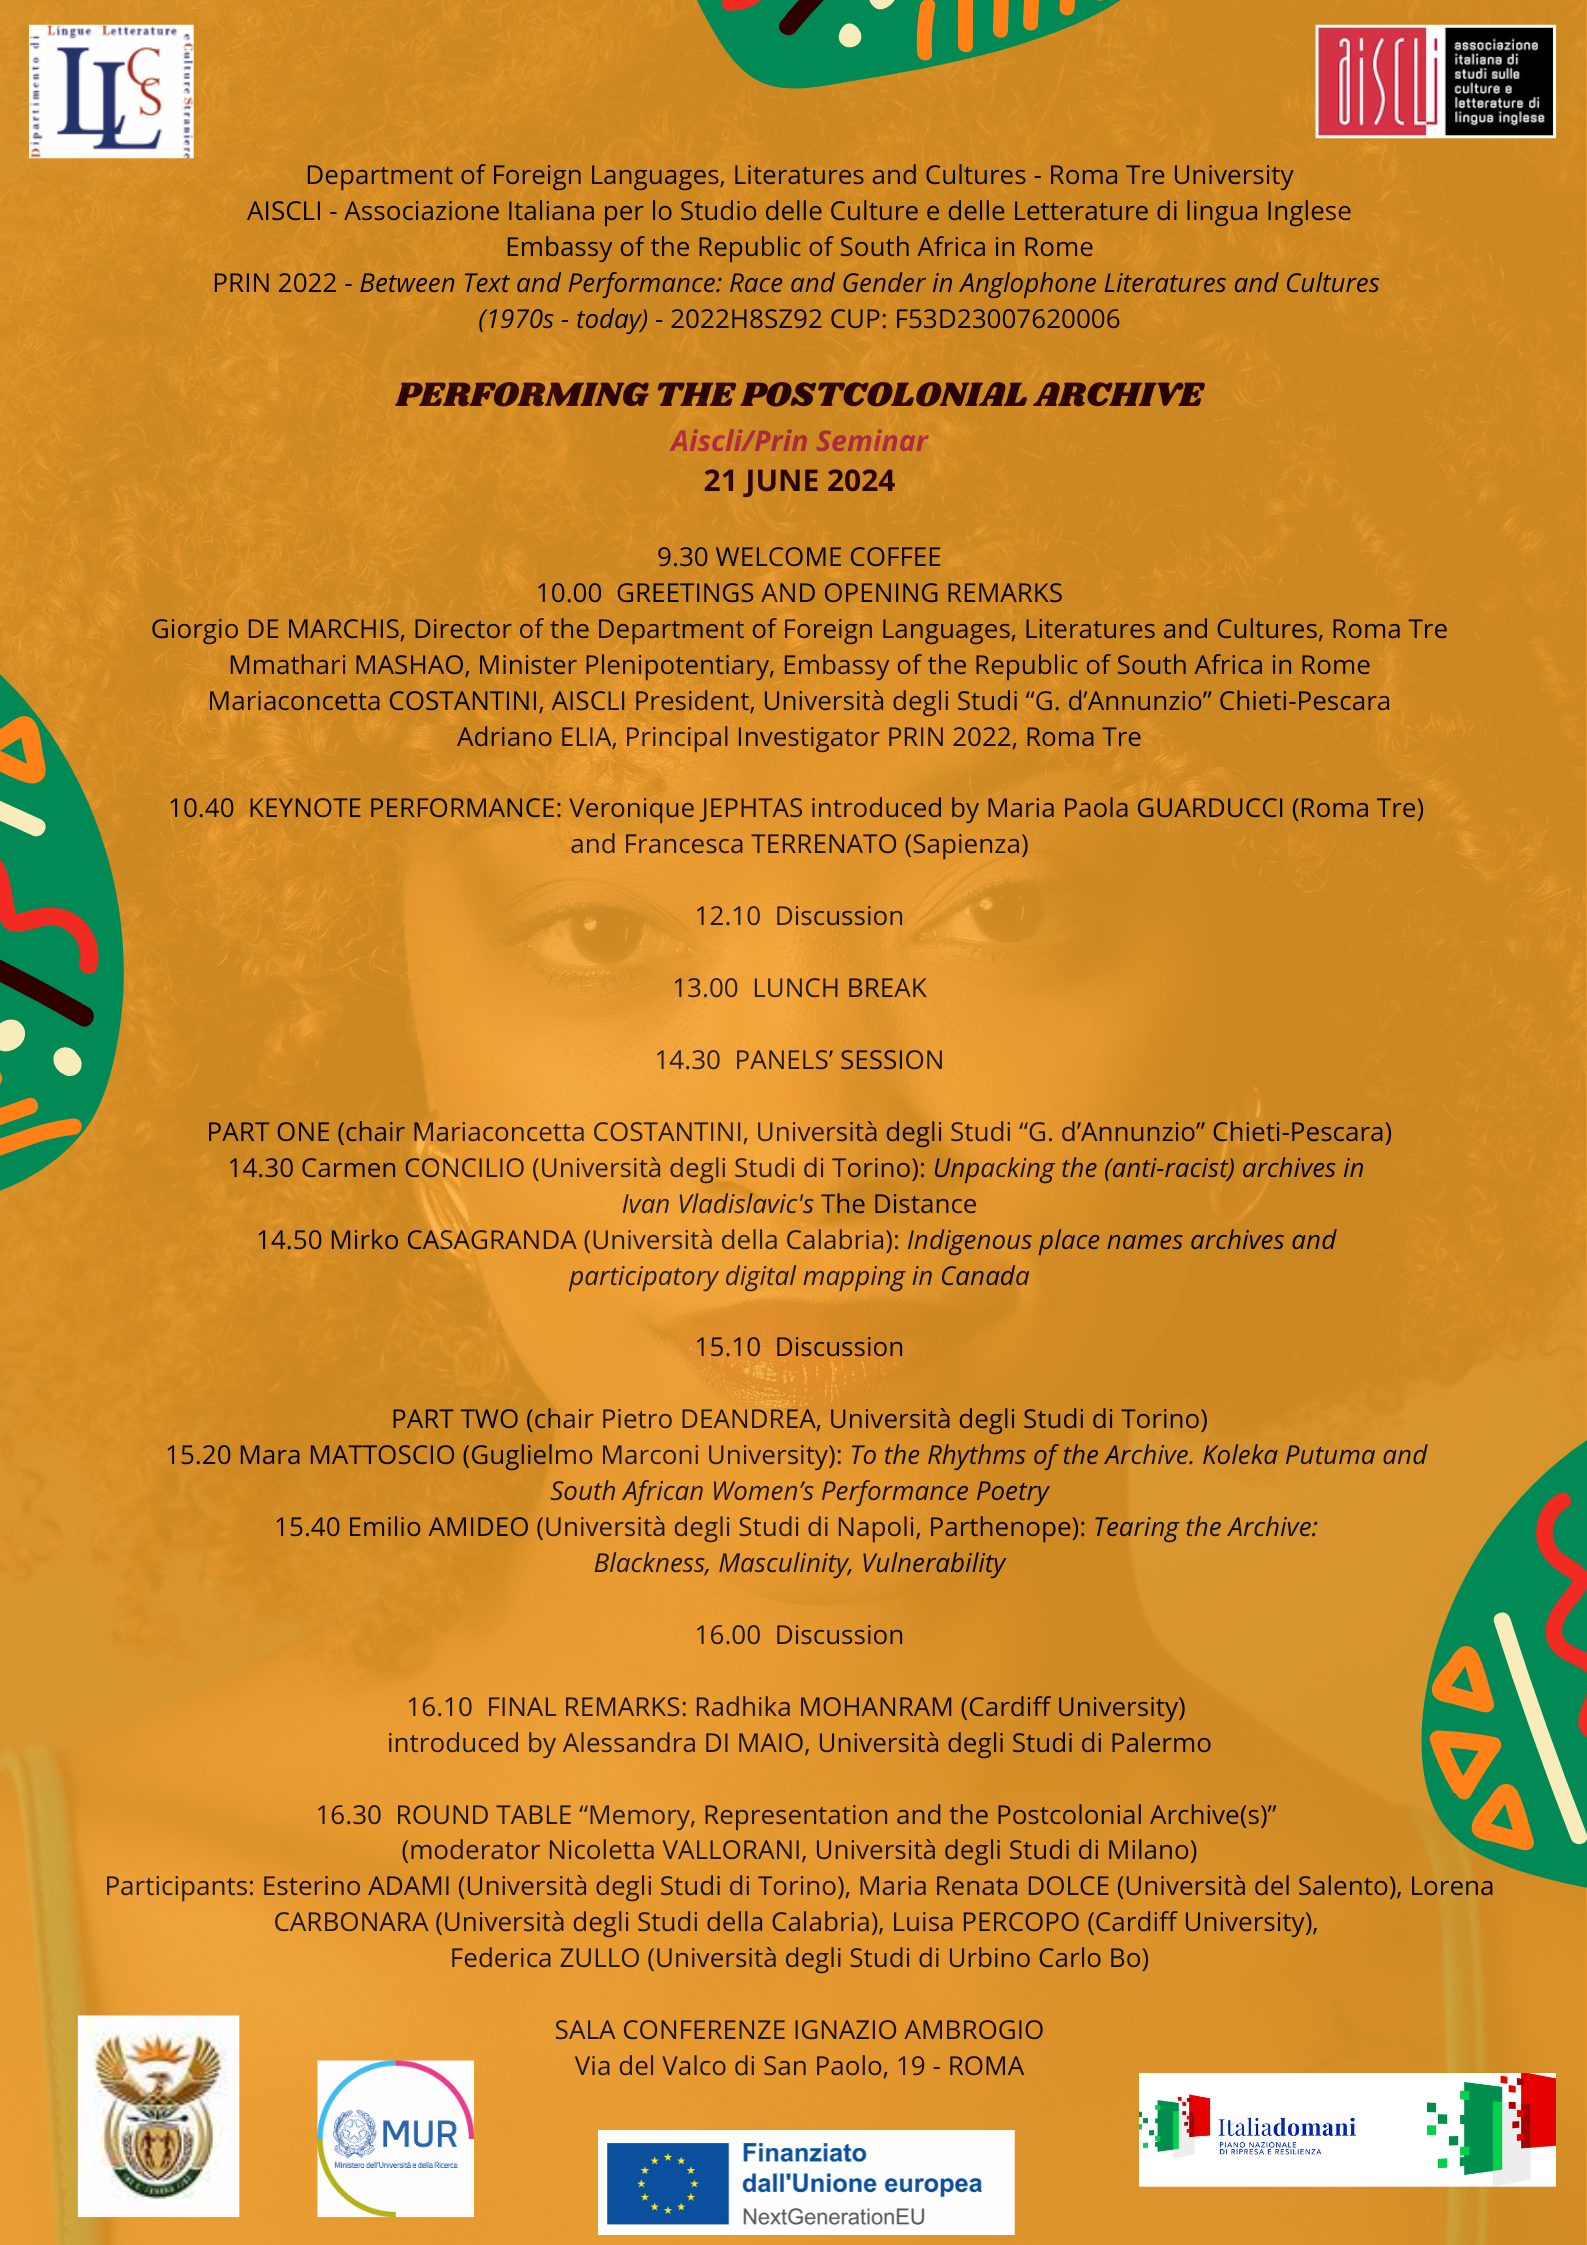 AISCLI/PRIN SEMINAR: “Performing the Postcolonial Archive” – June 21, 2024